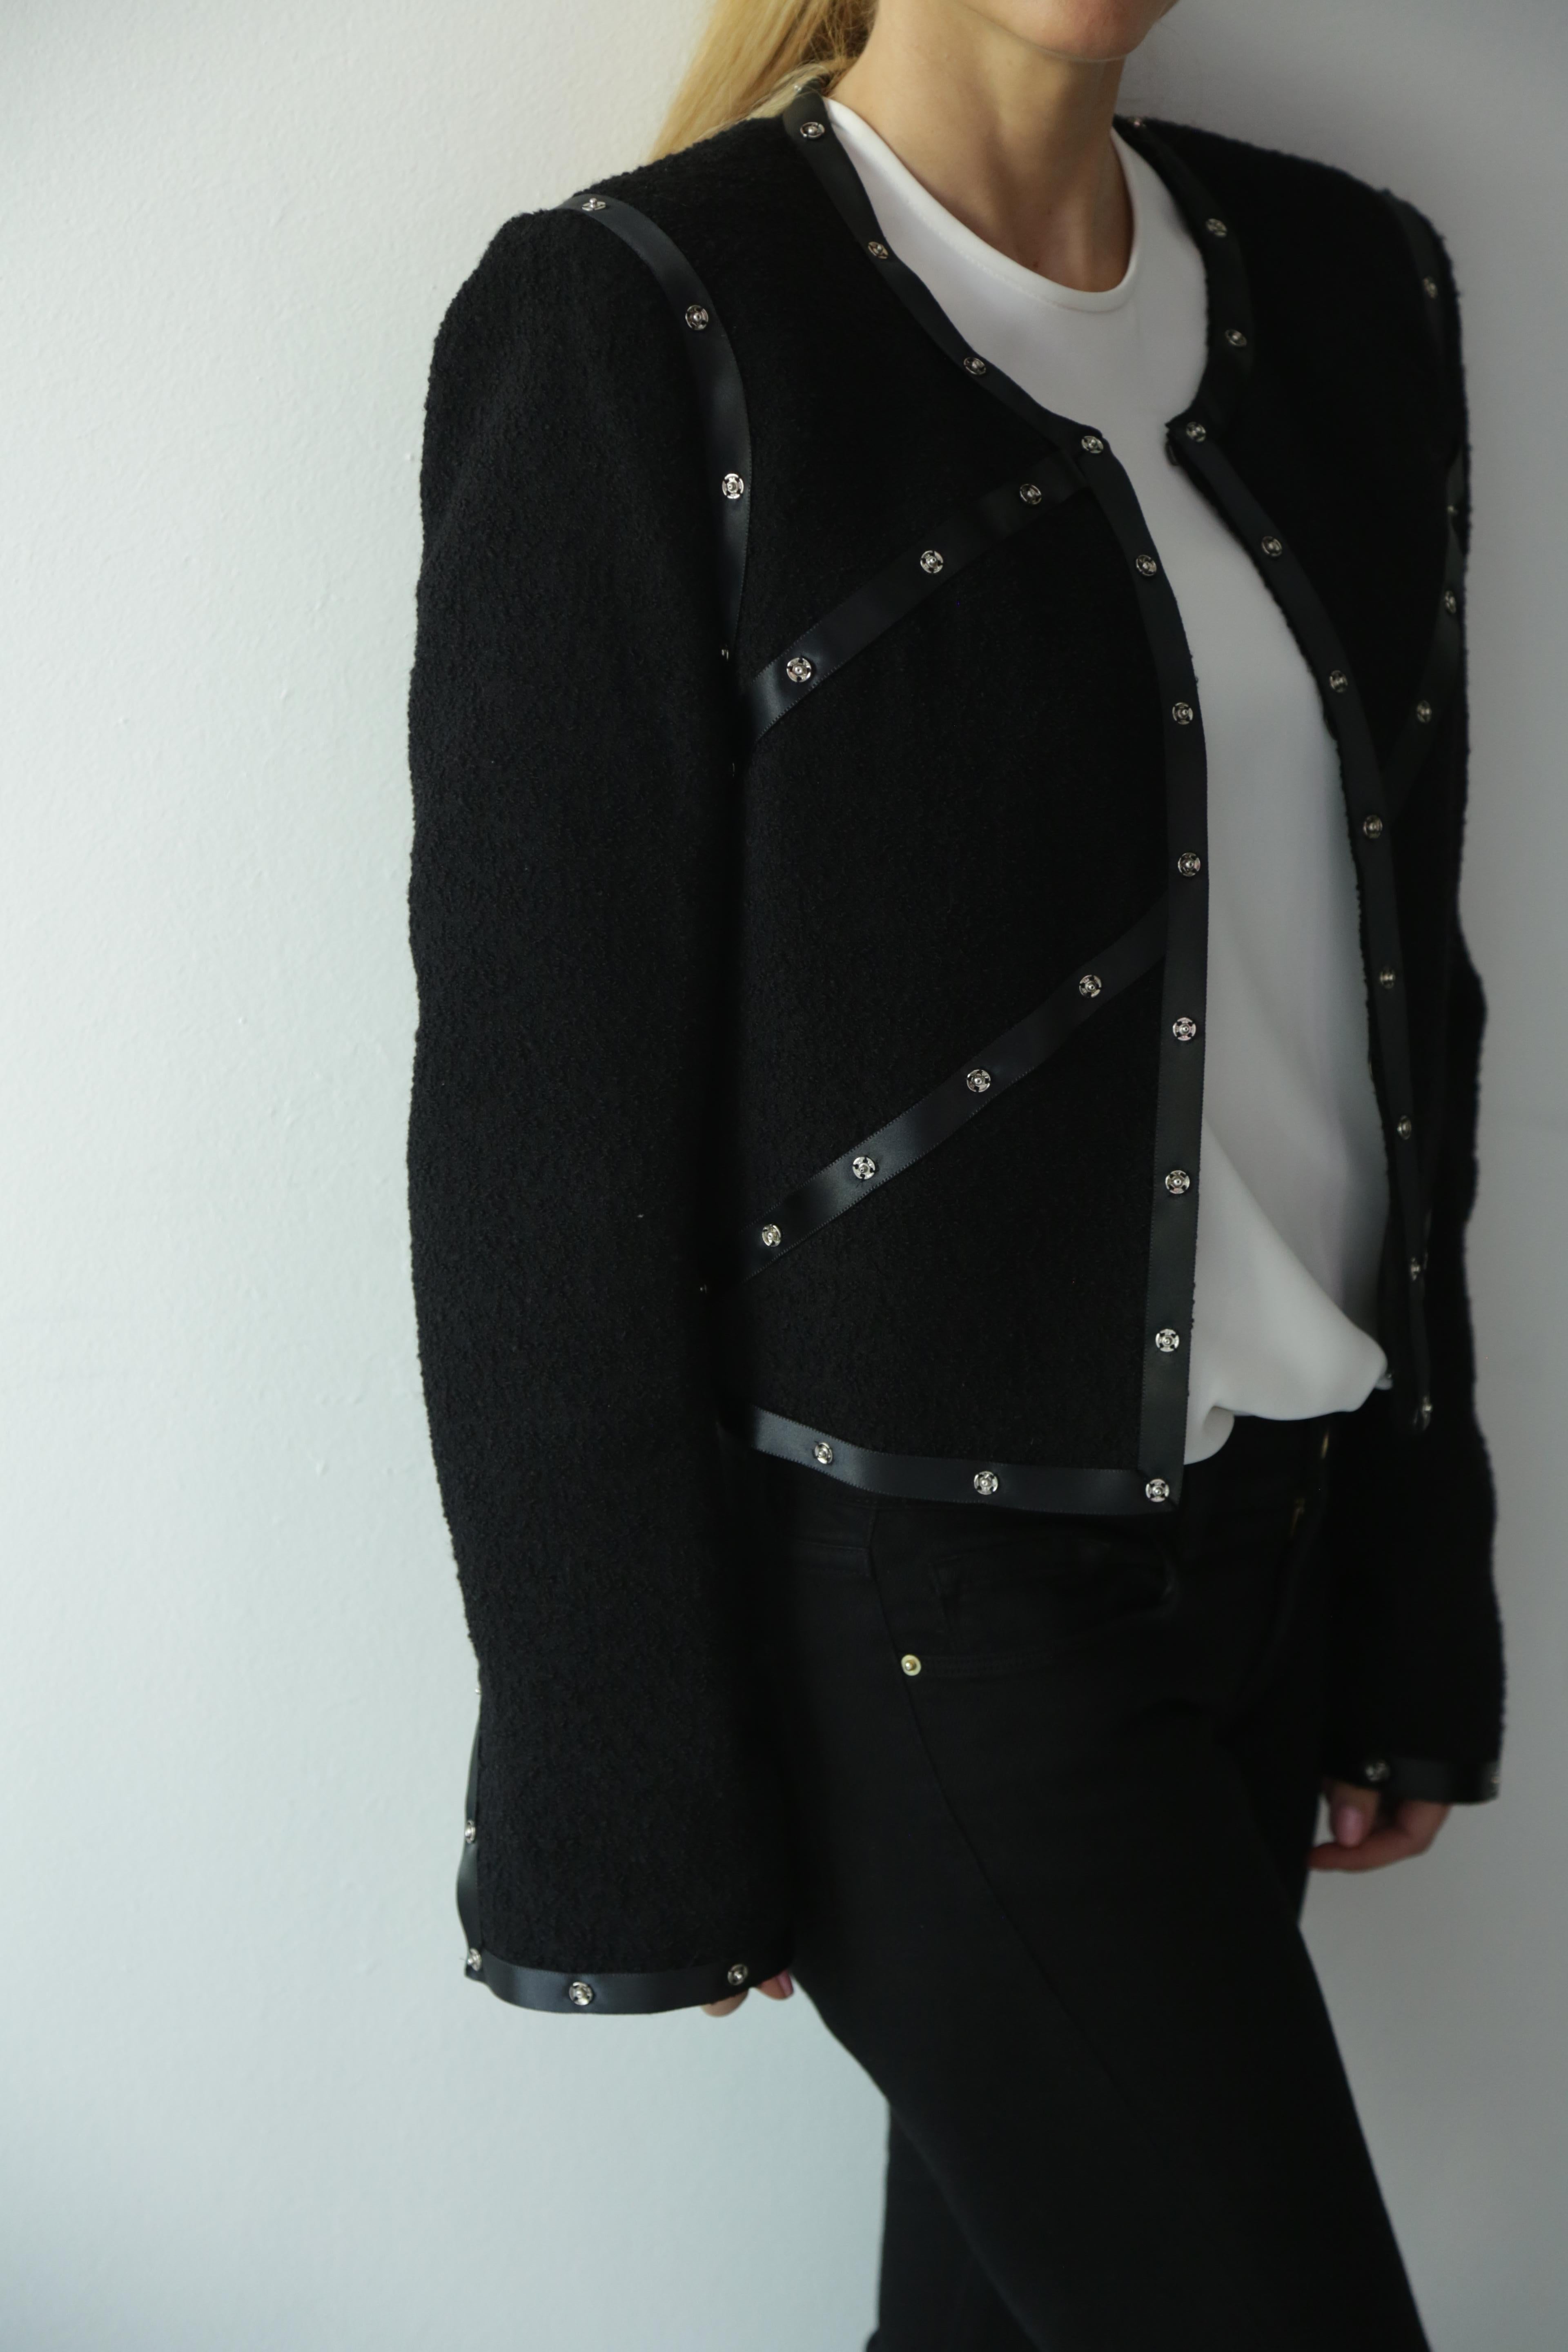 Chanel Black Embellished Jacket  with silver grommets Size M FALL 2003 1